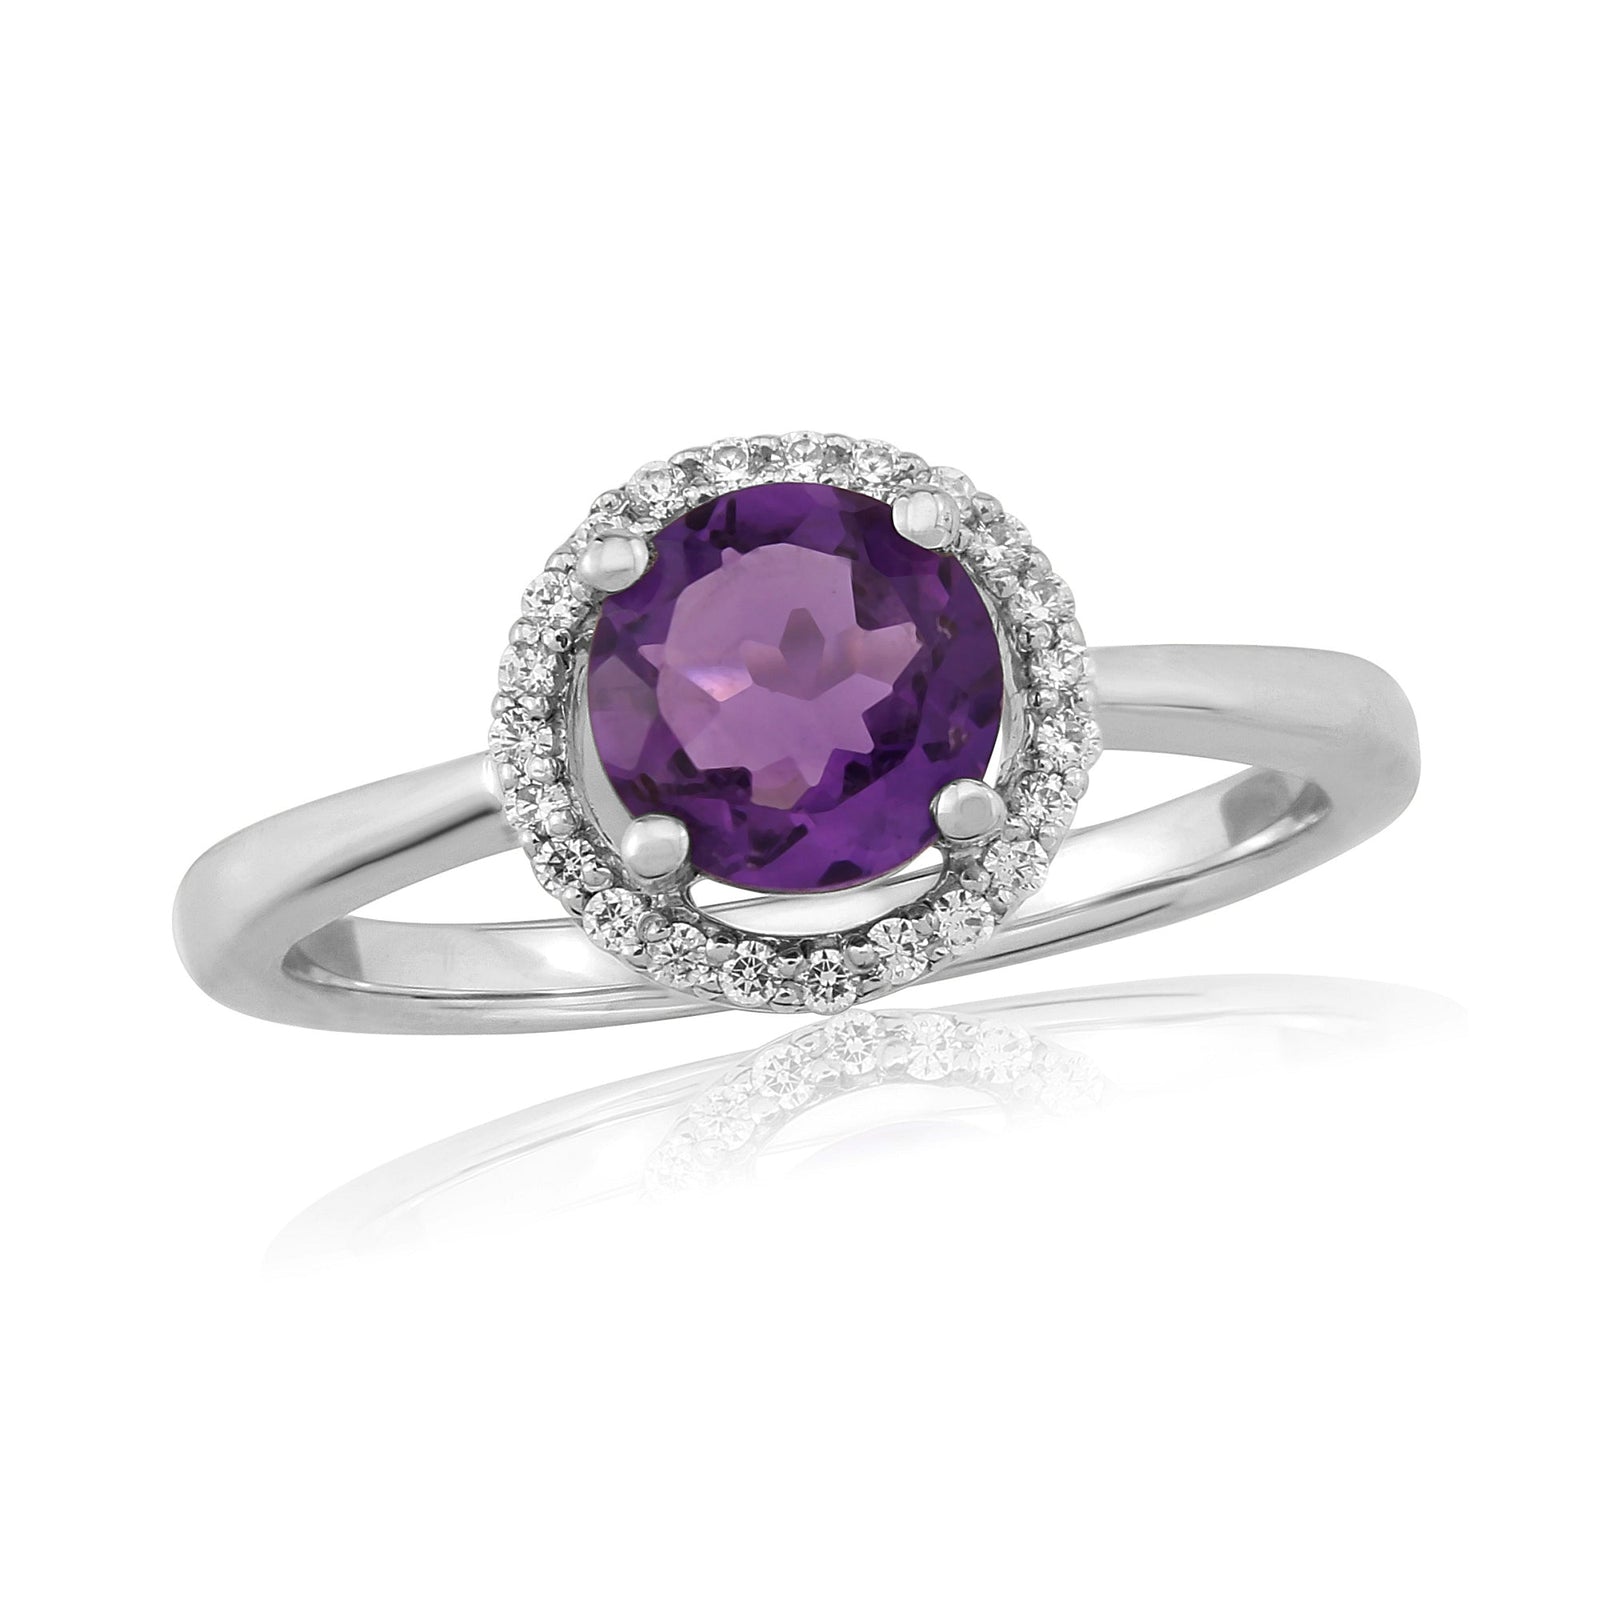 9ct white gold 6mm round amethyst & diamond halo cluster ring 0.10ct